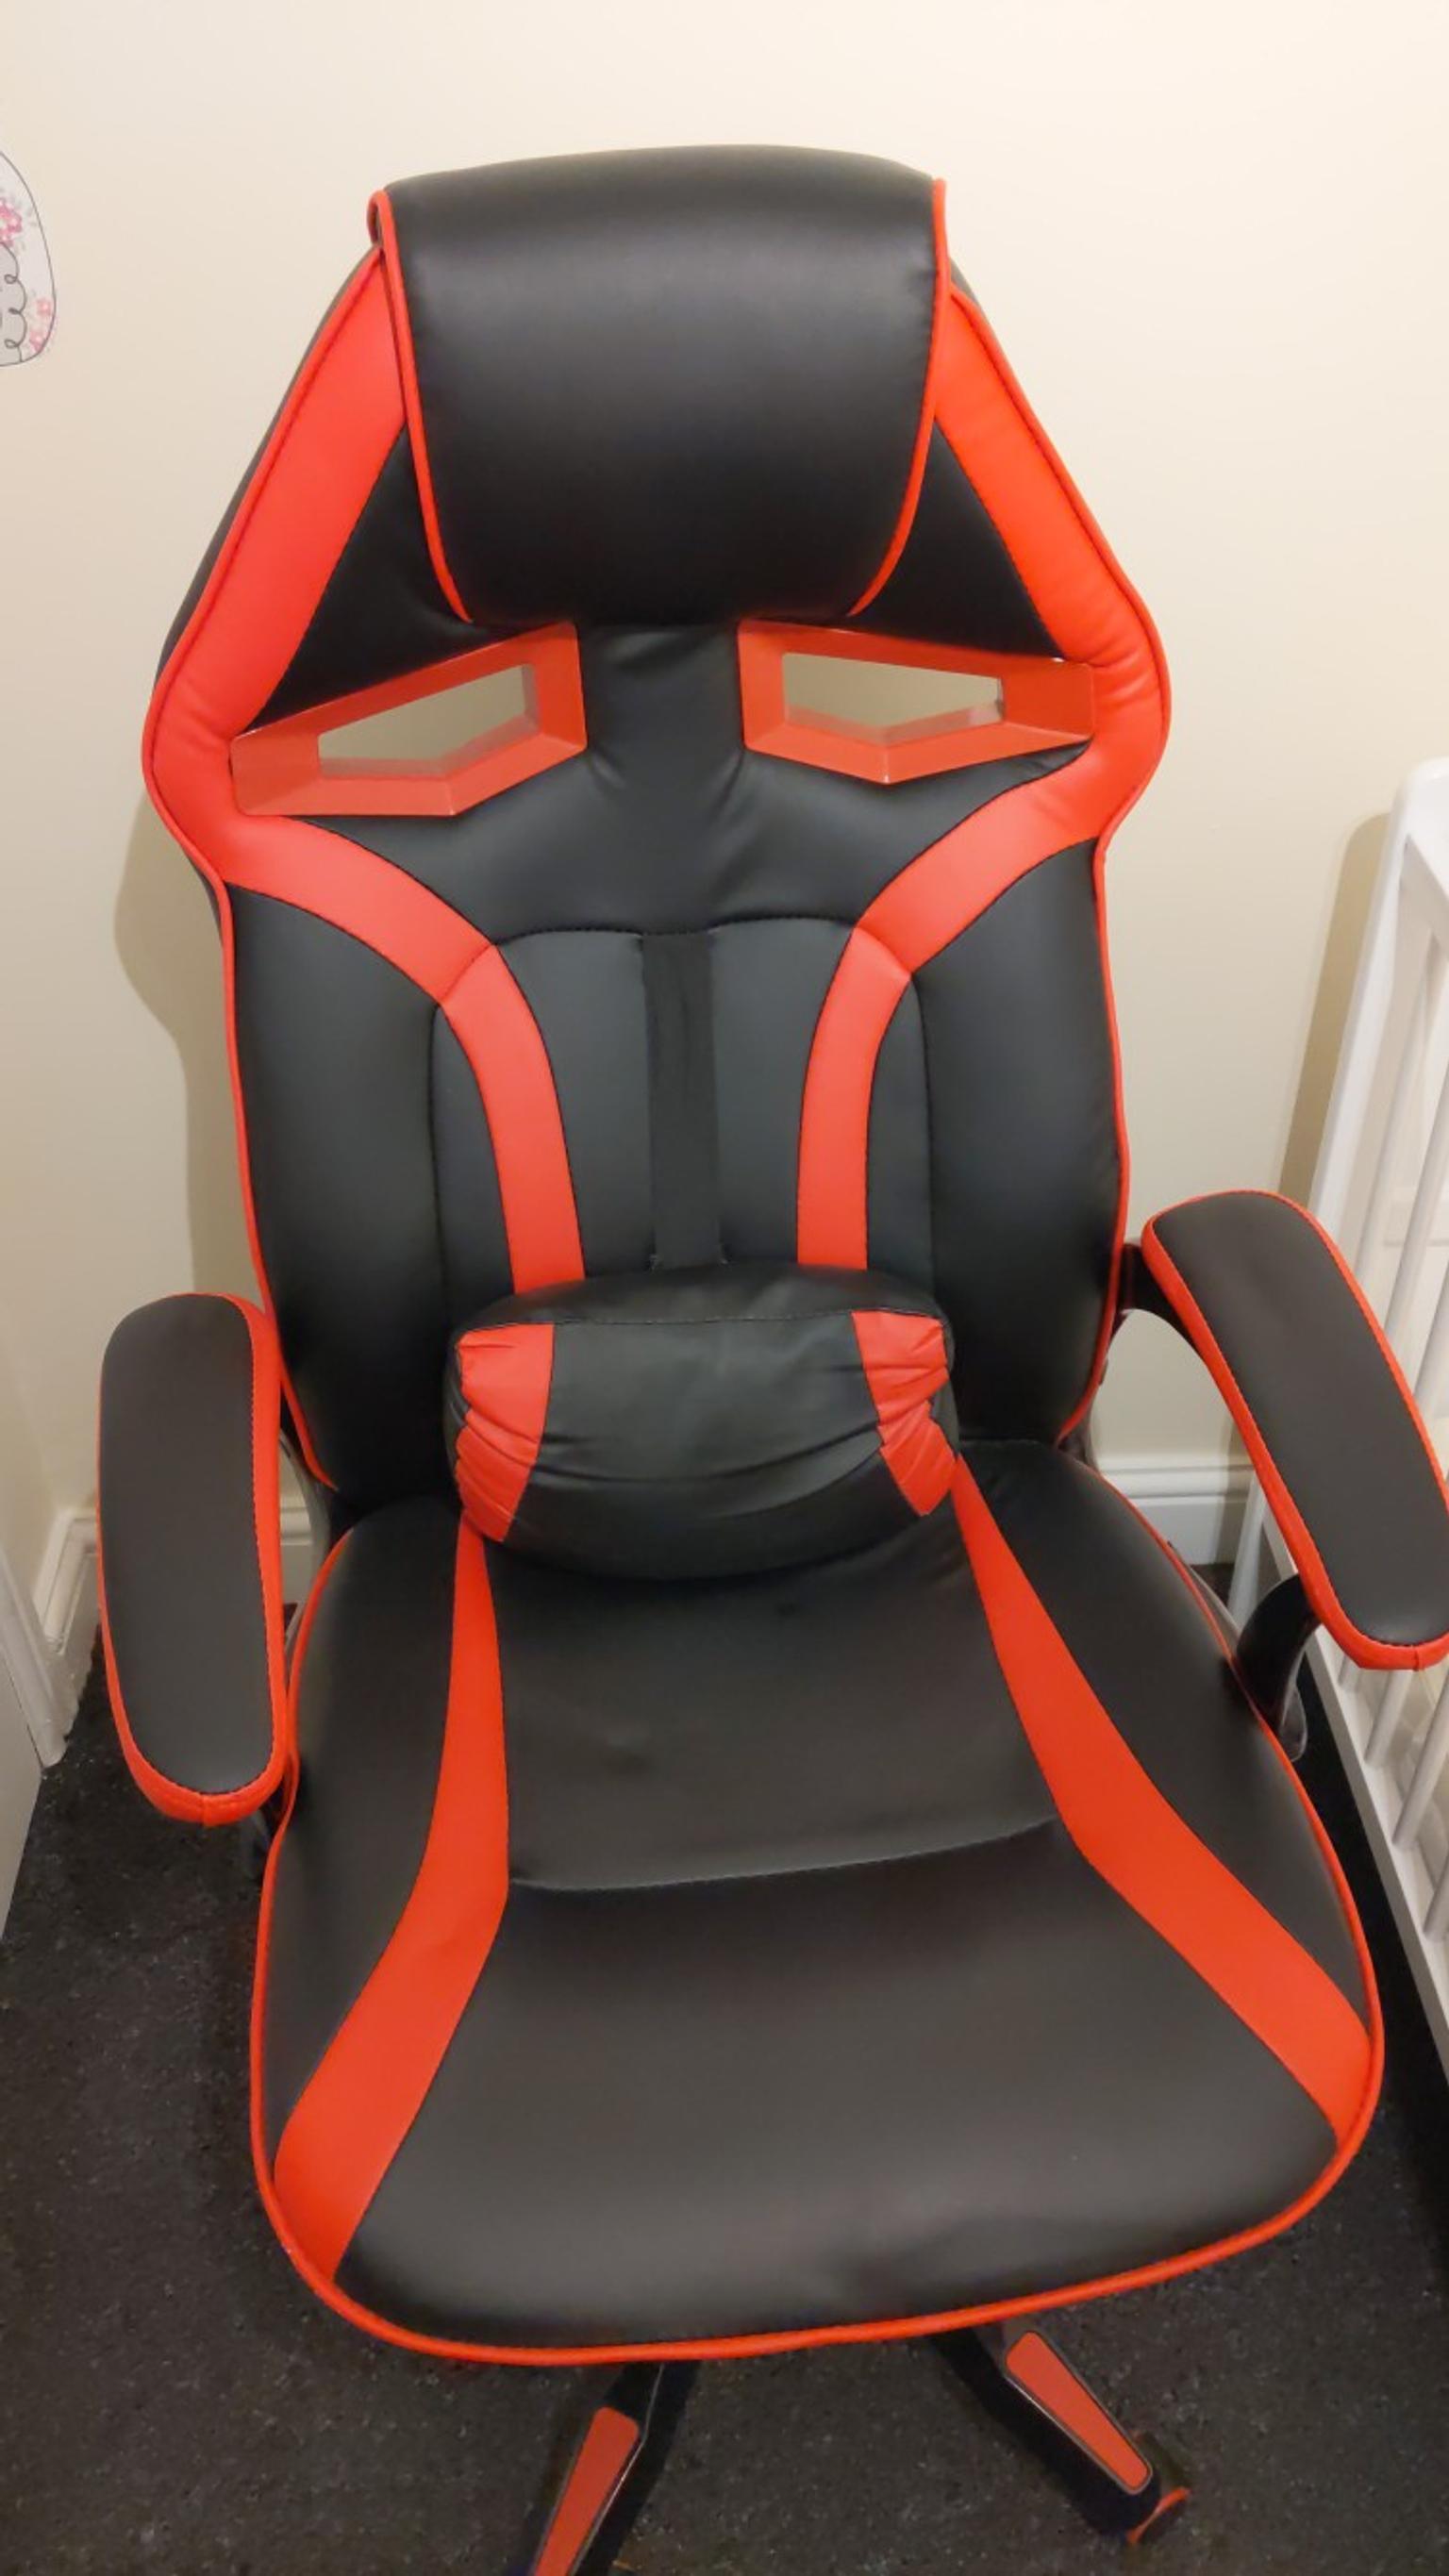 Red and Black office and gaming chair in Stevenage for £60